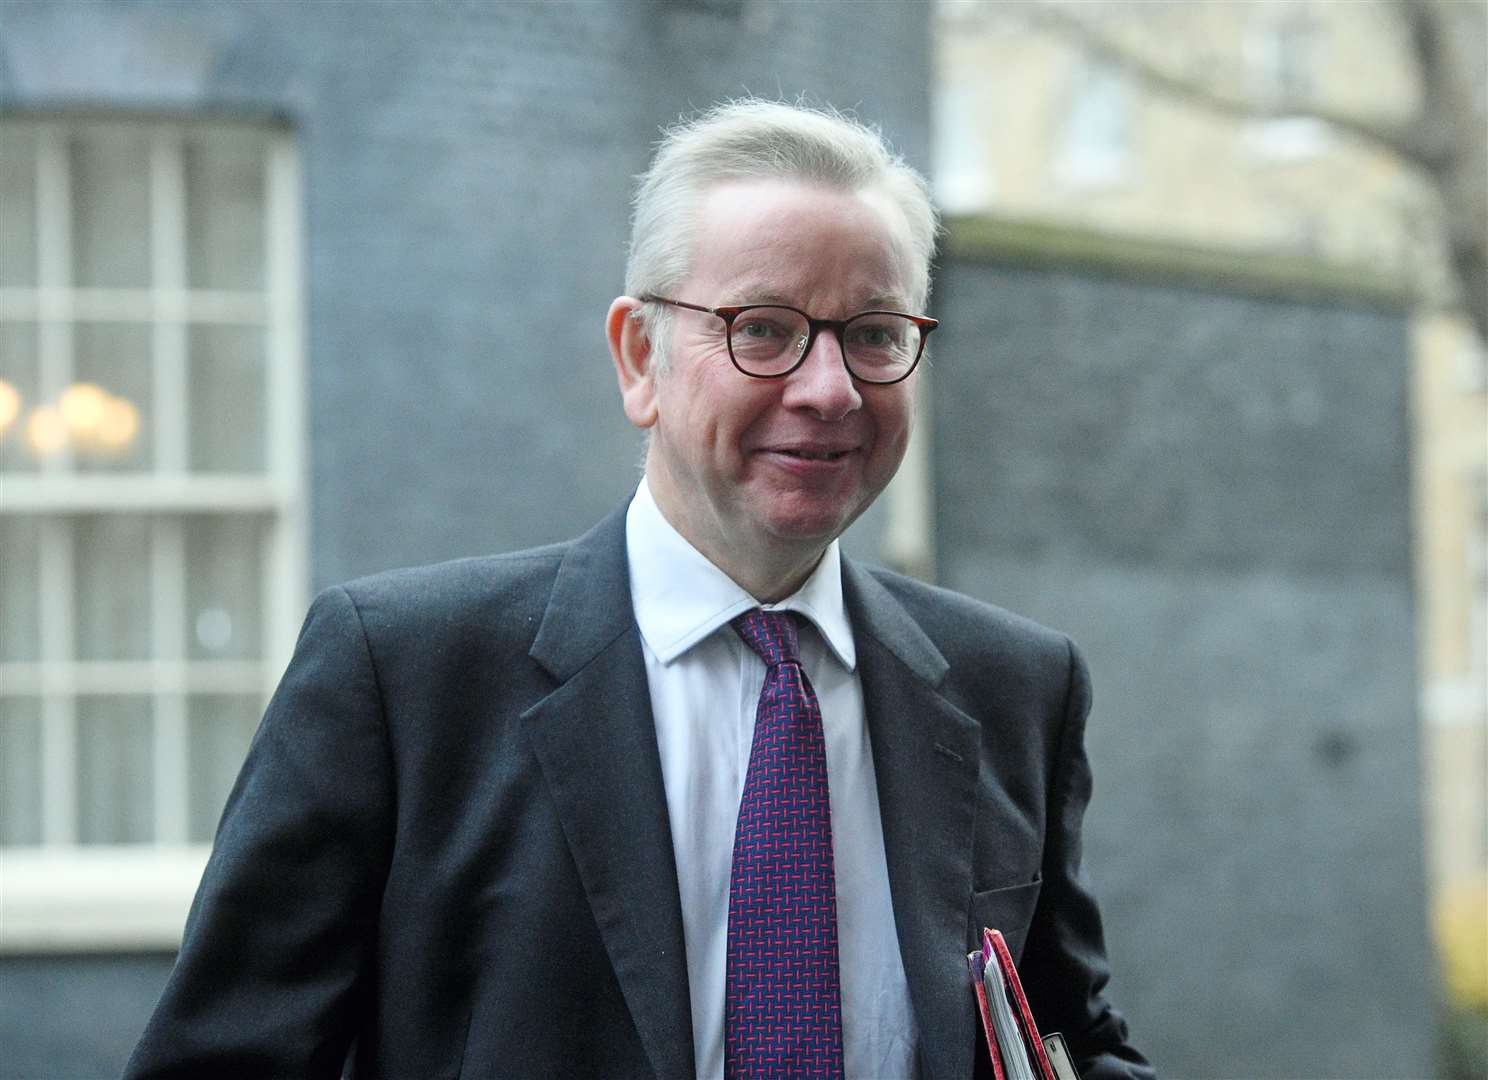 Michael Gove should apologise to children who lost support when Kids Company collapsed, the charity’s founder said (Kirsty O’Connor/PA)